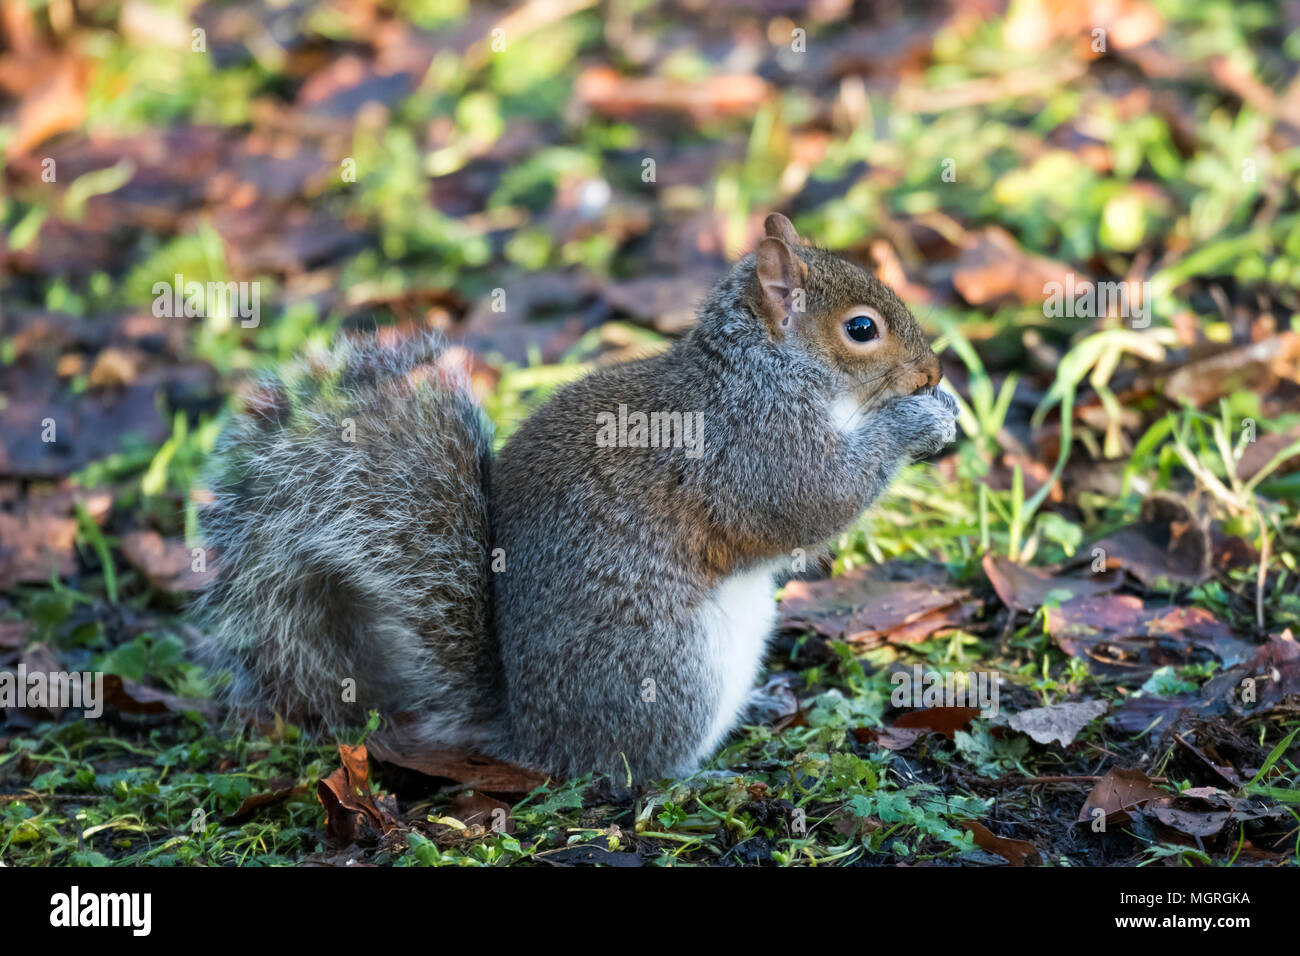 Close-up profile view of grey squirrel feeding on the ground, paws raised to mouth, its long bushy tail curled - garden, West Yorkshire, England, UK. Stock Photo